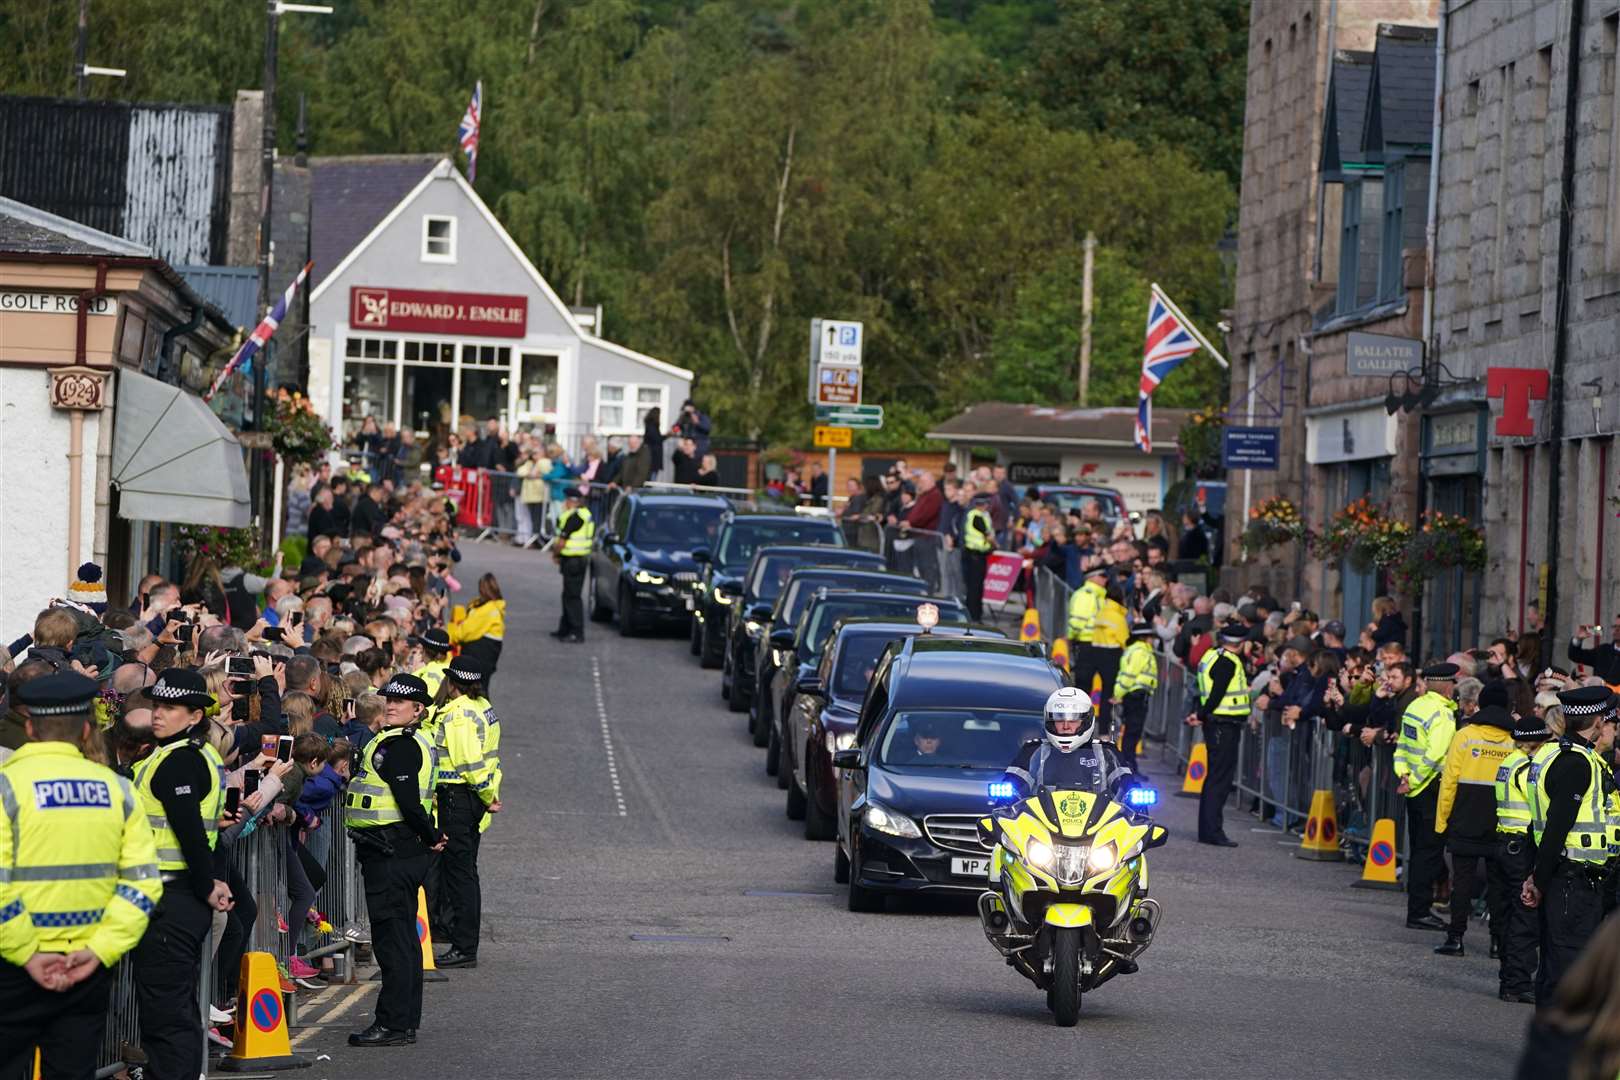 The hearse carrying the coffin of Queen Elizabeth II, draped with the Royal Standard of Scotland, passing through Ballater as it continues its journey to Edinburgh from Balmoral (Andrew Milligan/PA)